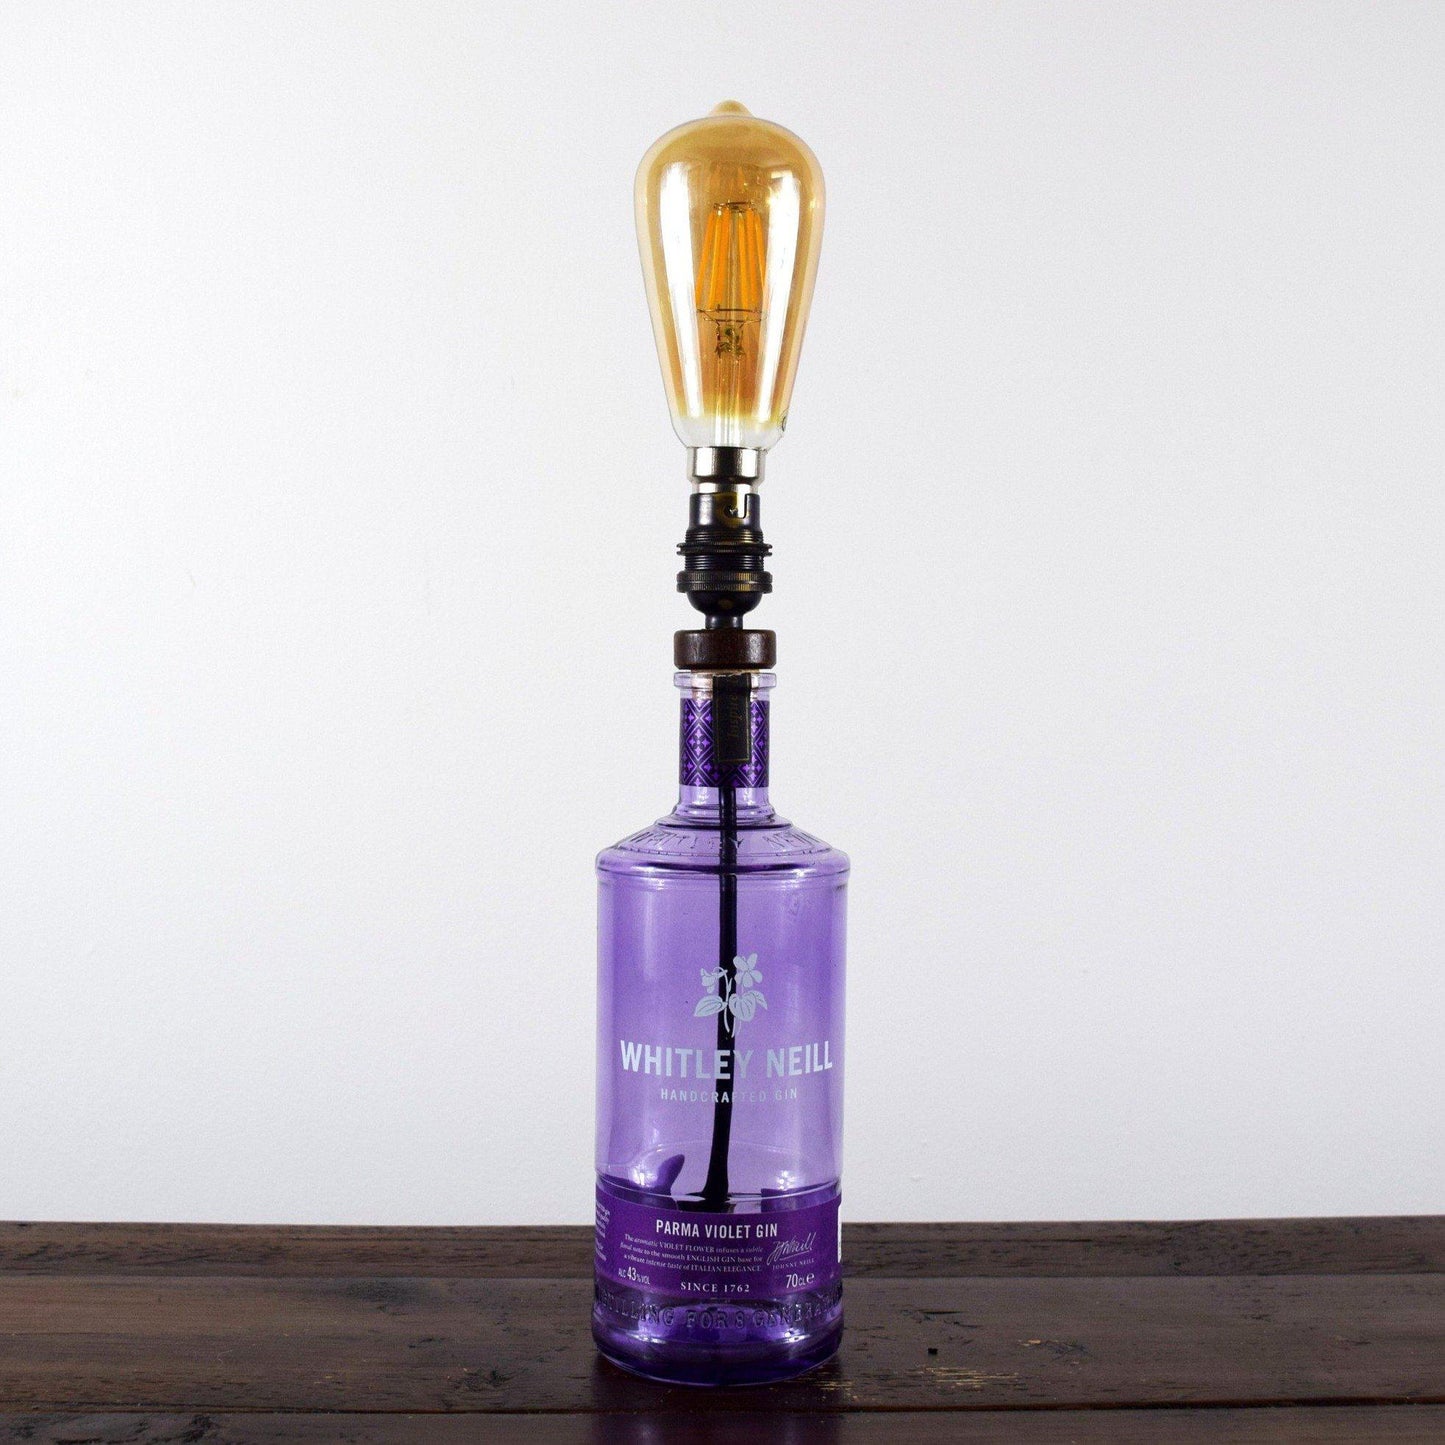 Whitley Neill Parma Violet Gin Bottle Table Lamp Gin Bottle Table Lamps